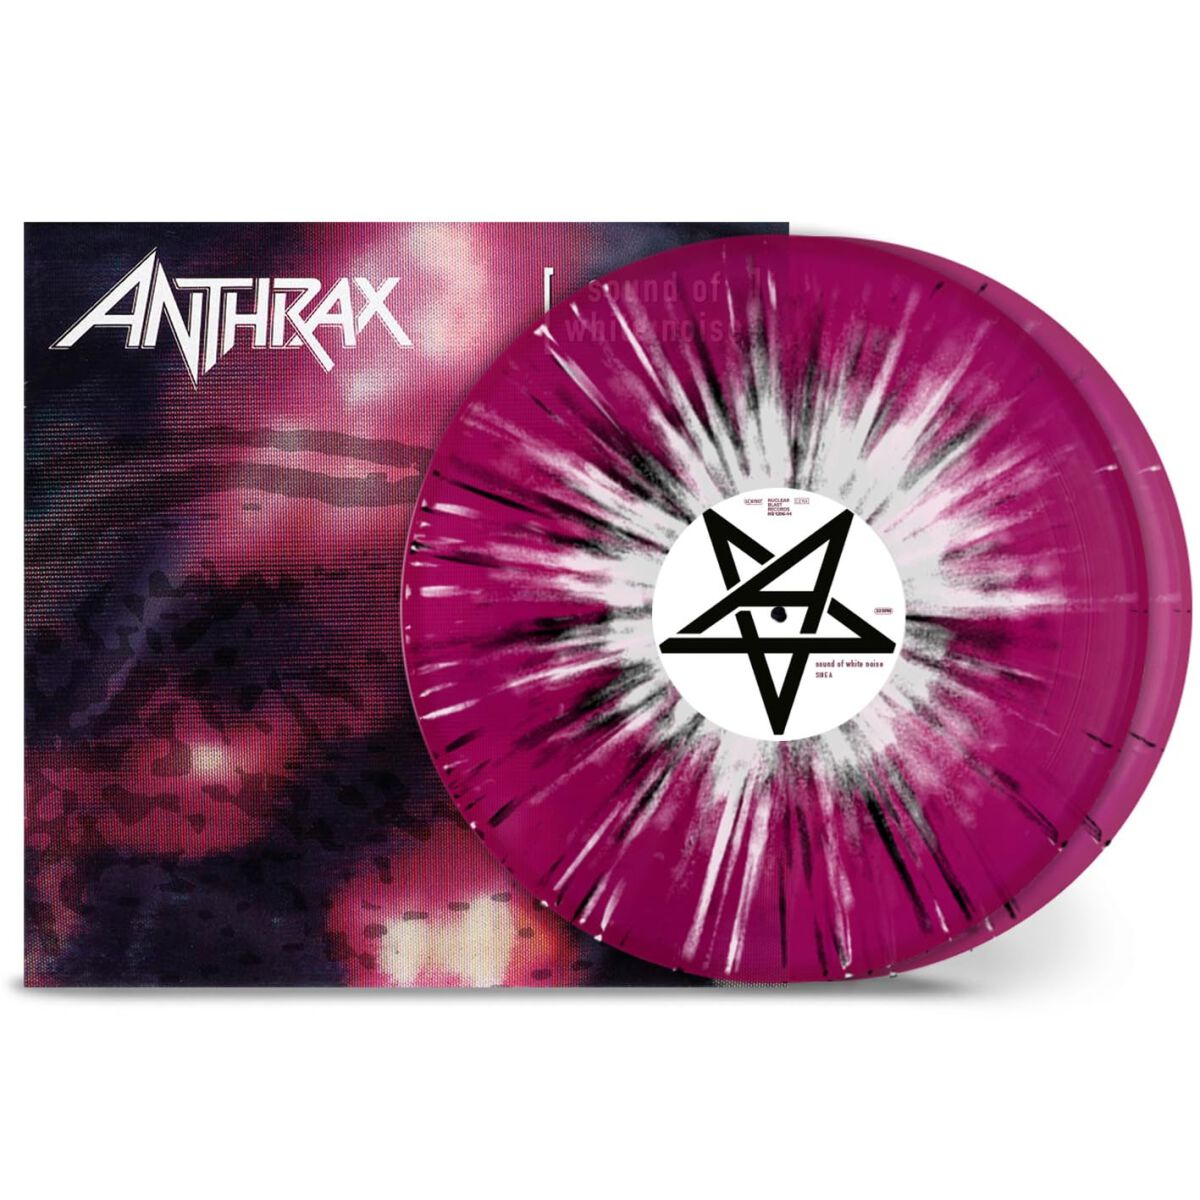 Sound of white noise von Anthrax - 2-LP (Coloured, Limited Edition, Re-Release, Standard)